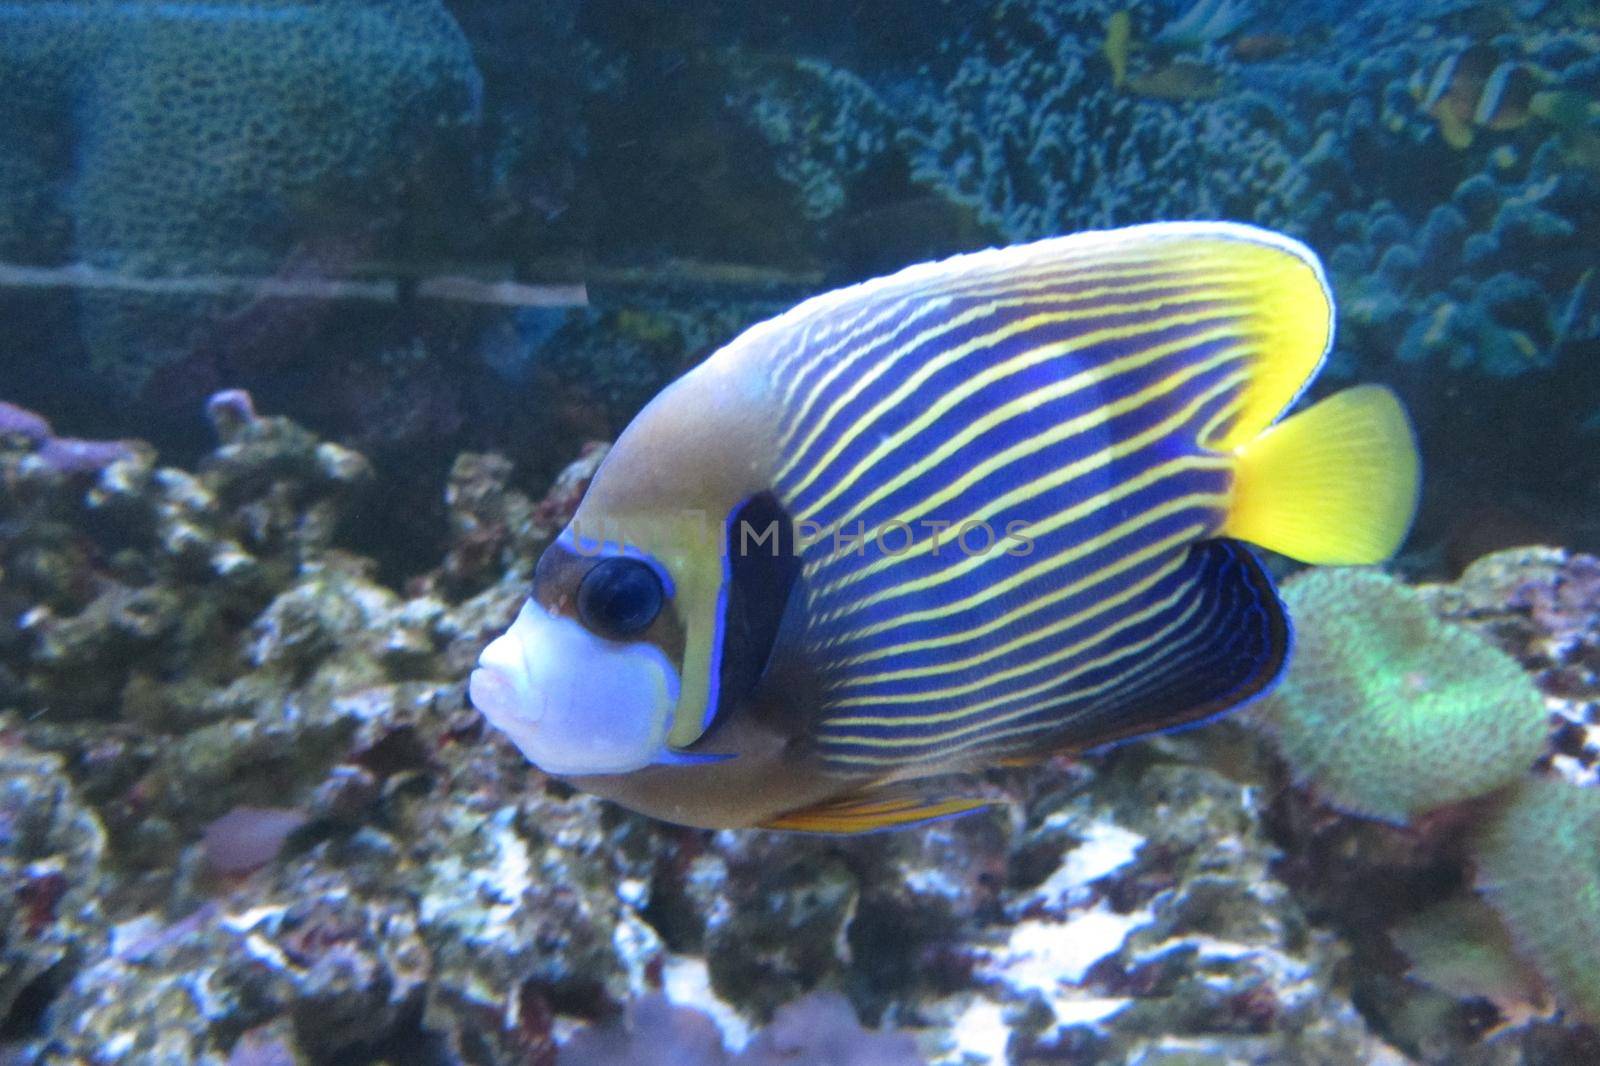 On image: Emperor angelfish, Pomacanthus imperator, marine angelfish, tropical fish. Regal Angelfish. Marine fishes with beautiful colors. Beautiful coral fish inaquarium in shades of blue with a yellow tail